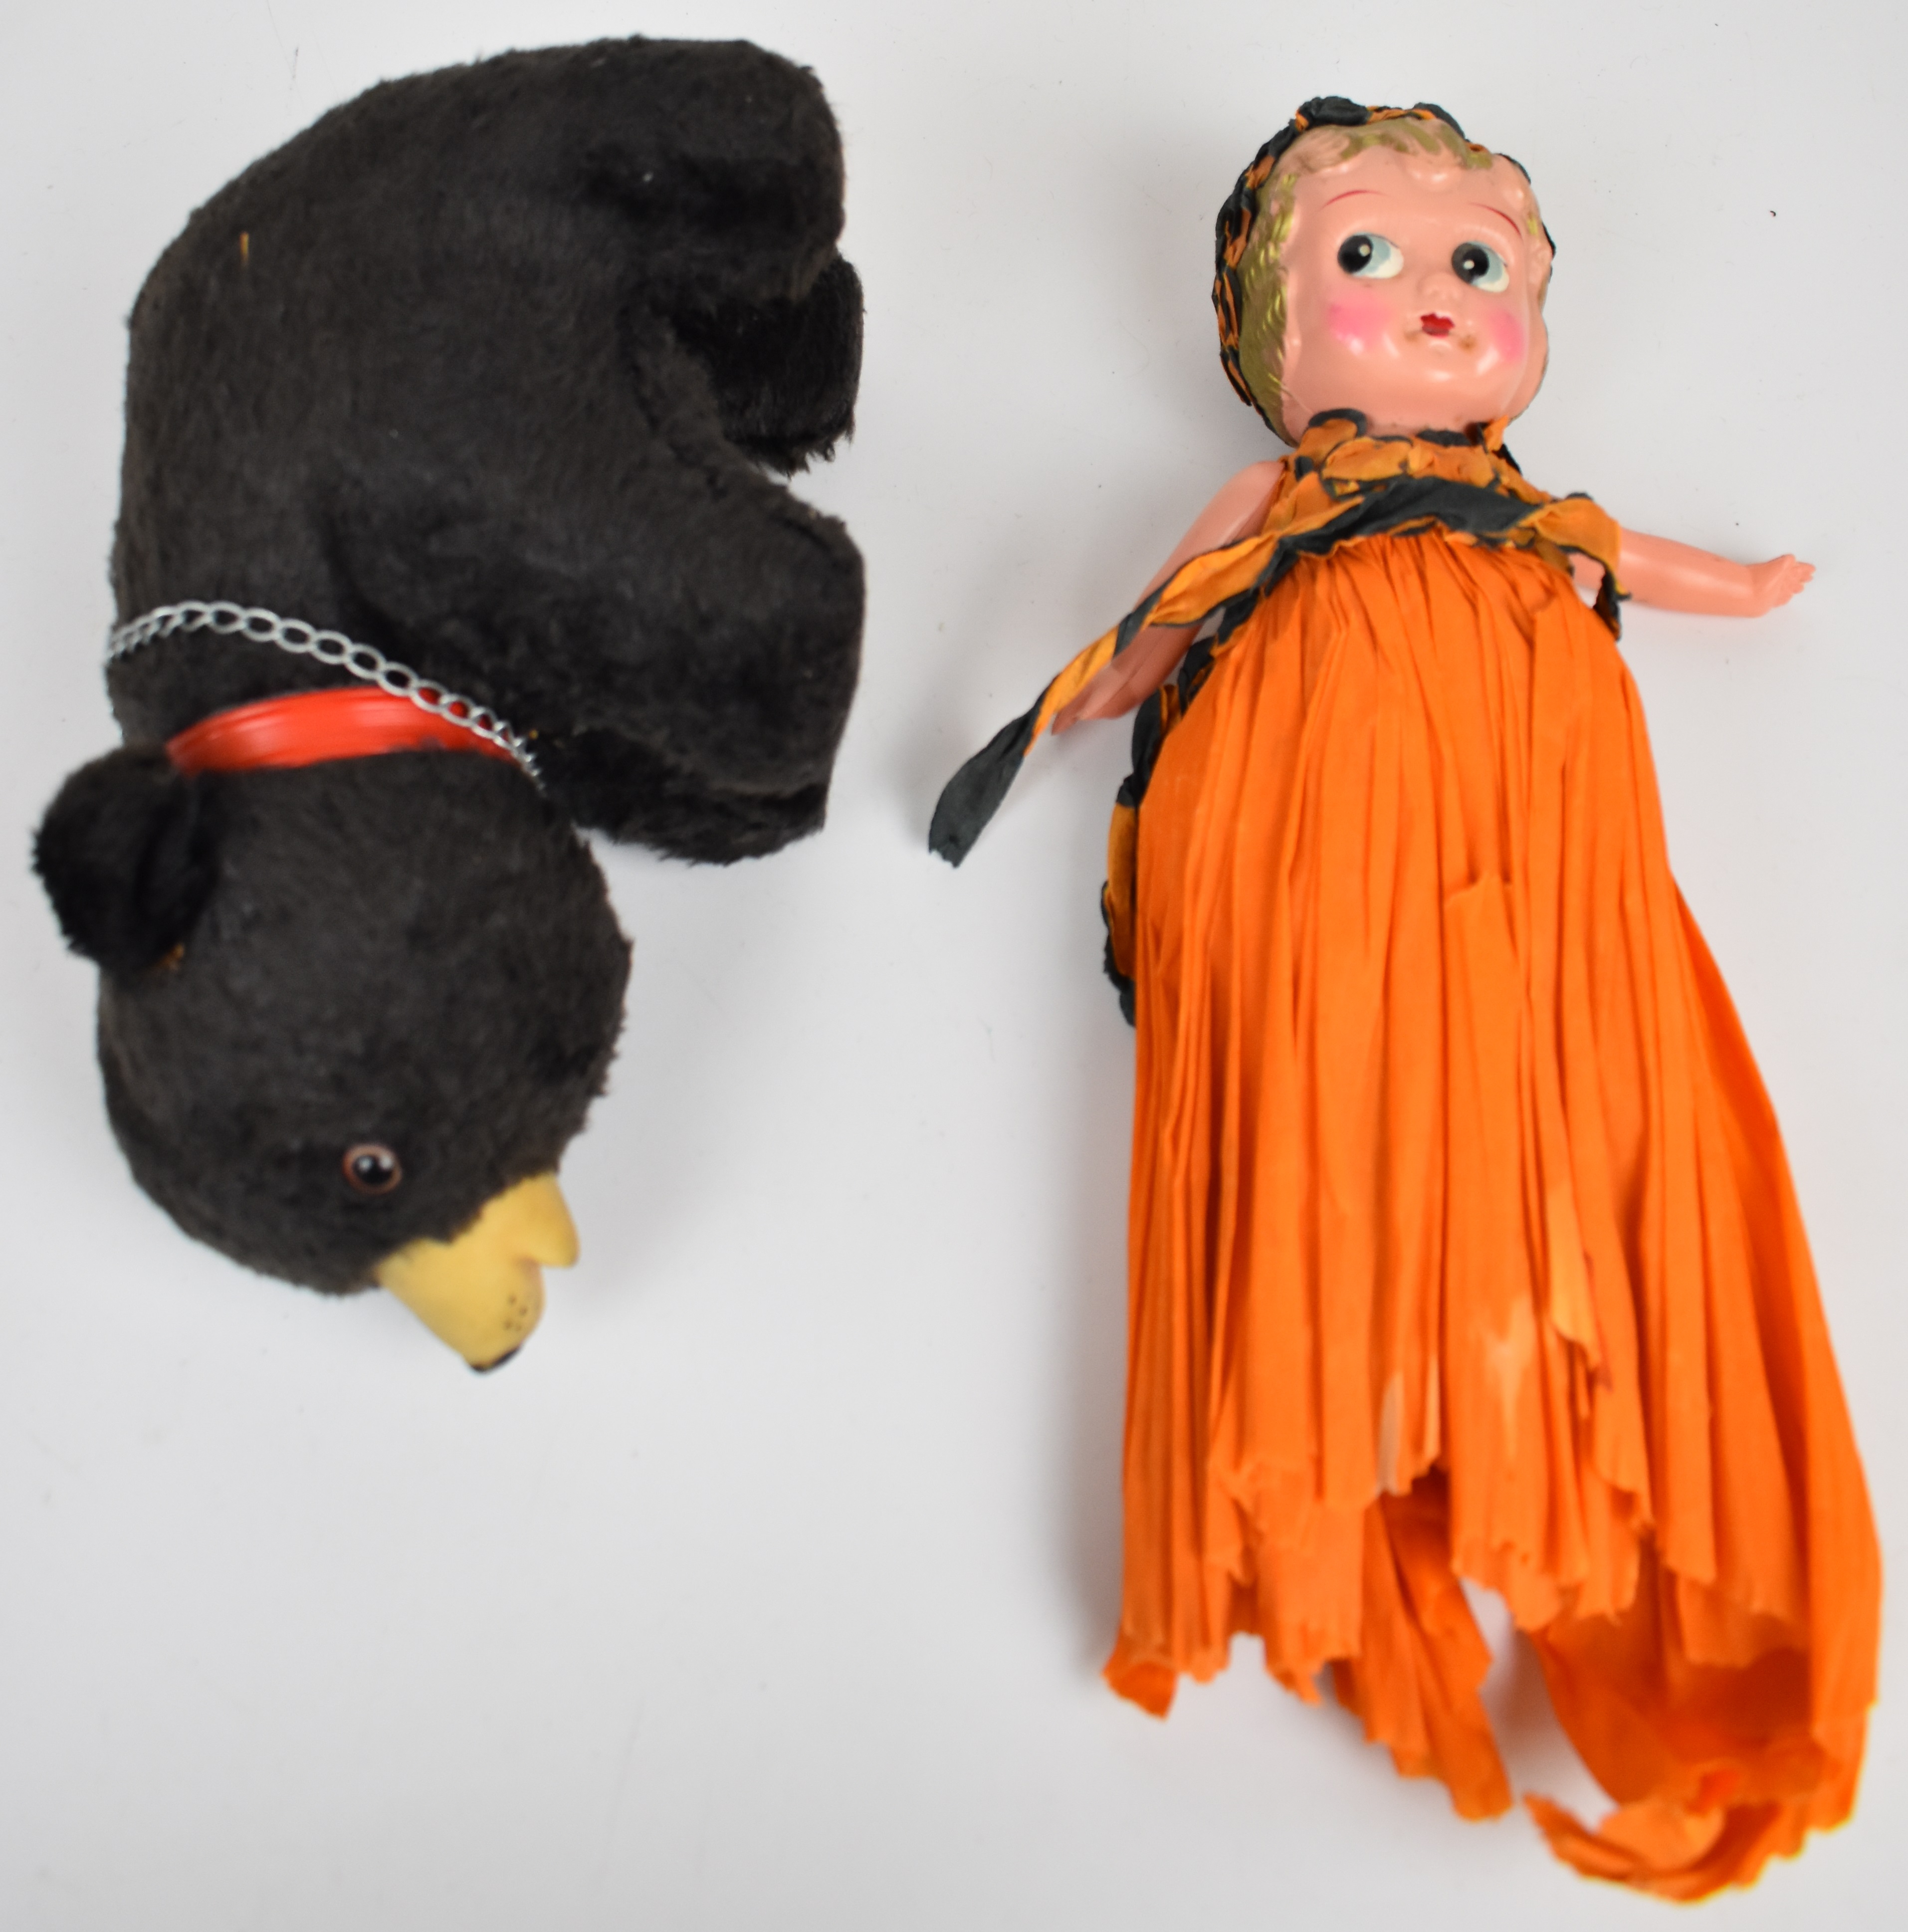 Five vintage Steiff, Merrythought and similar plush toys together with a 1930's celluloid doll in - Image 4 of 5